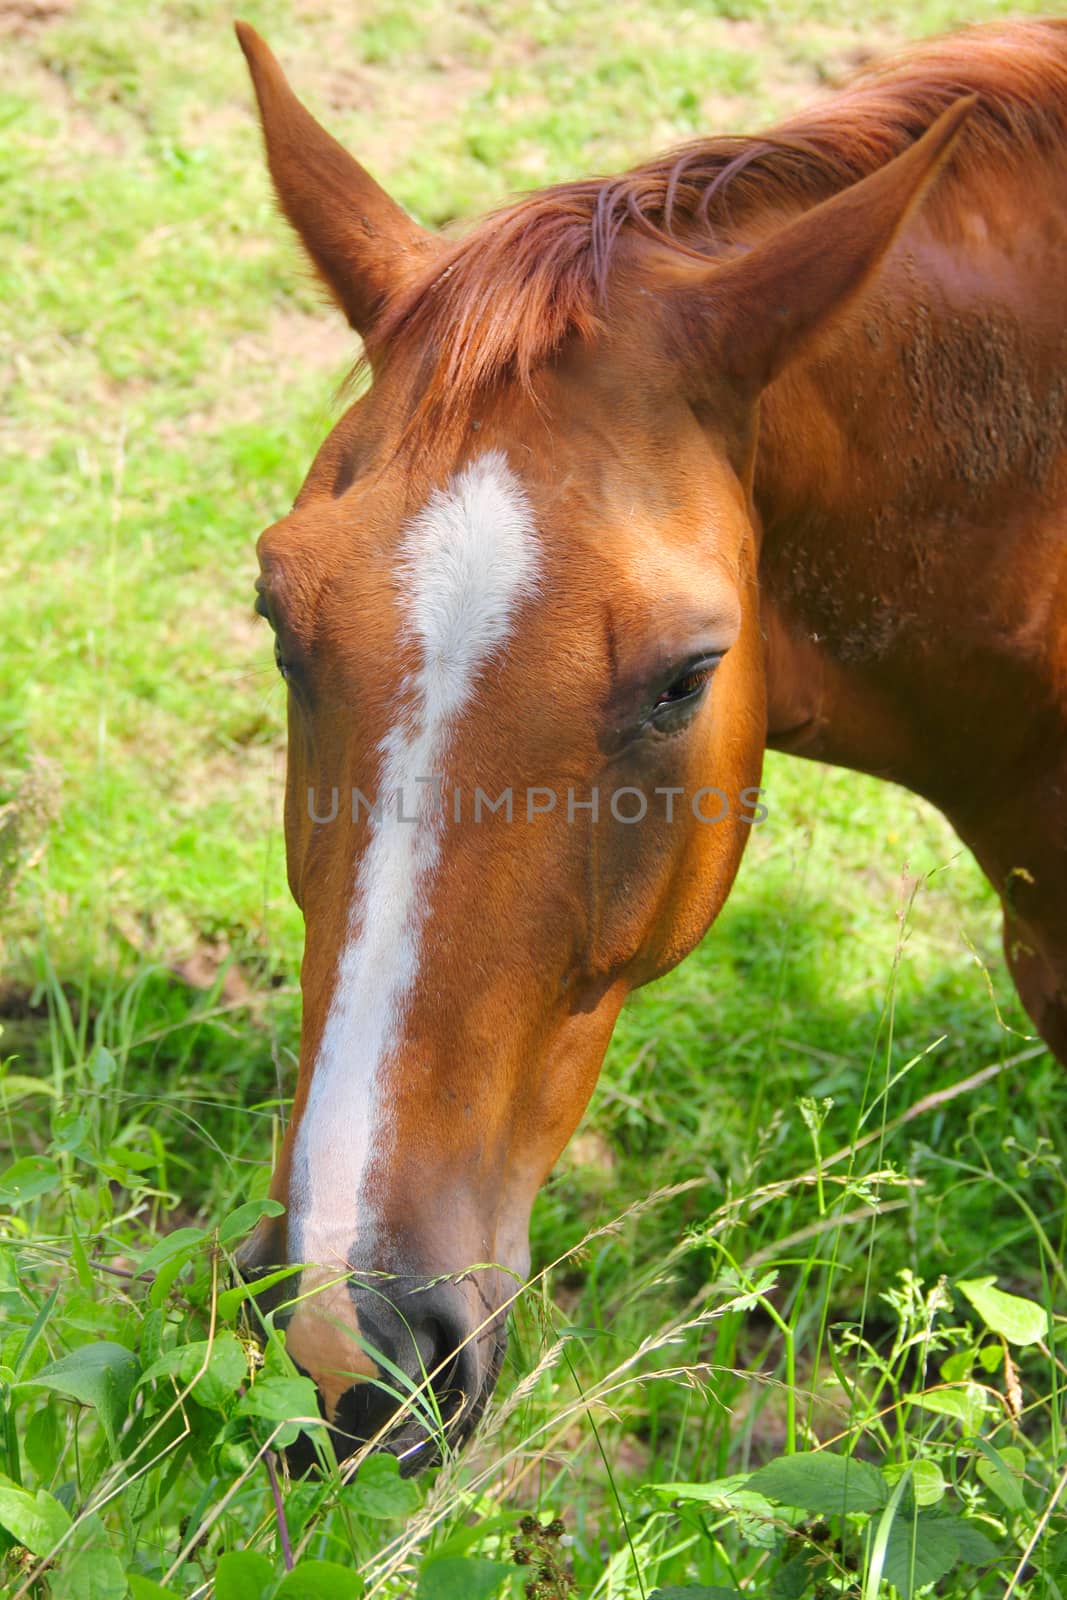 Portrait of horse eating grass close up view